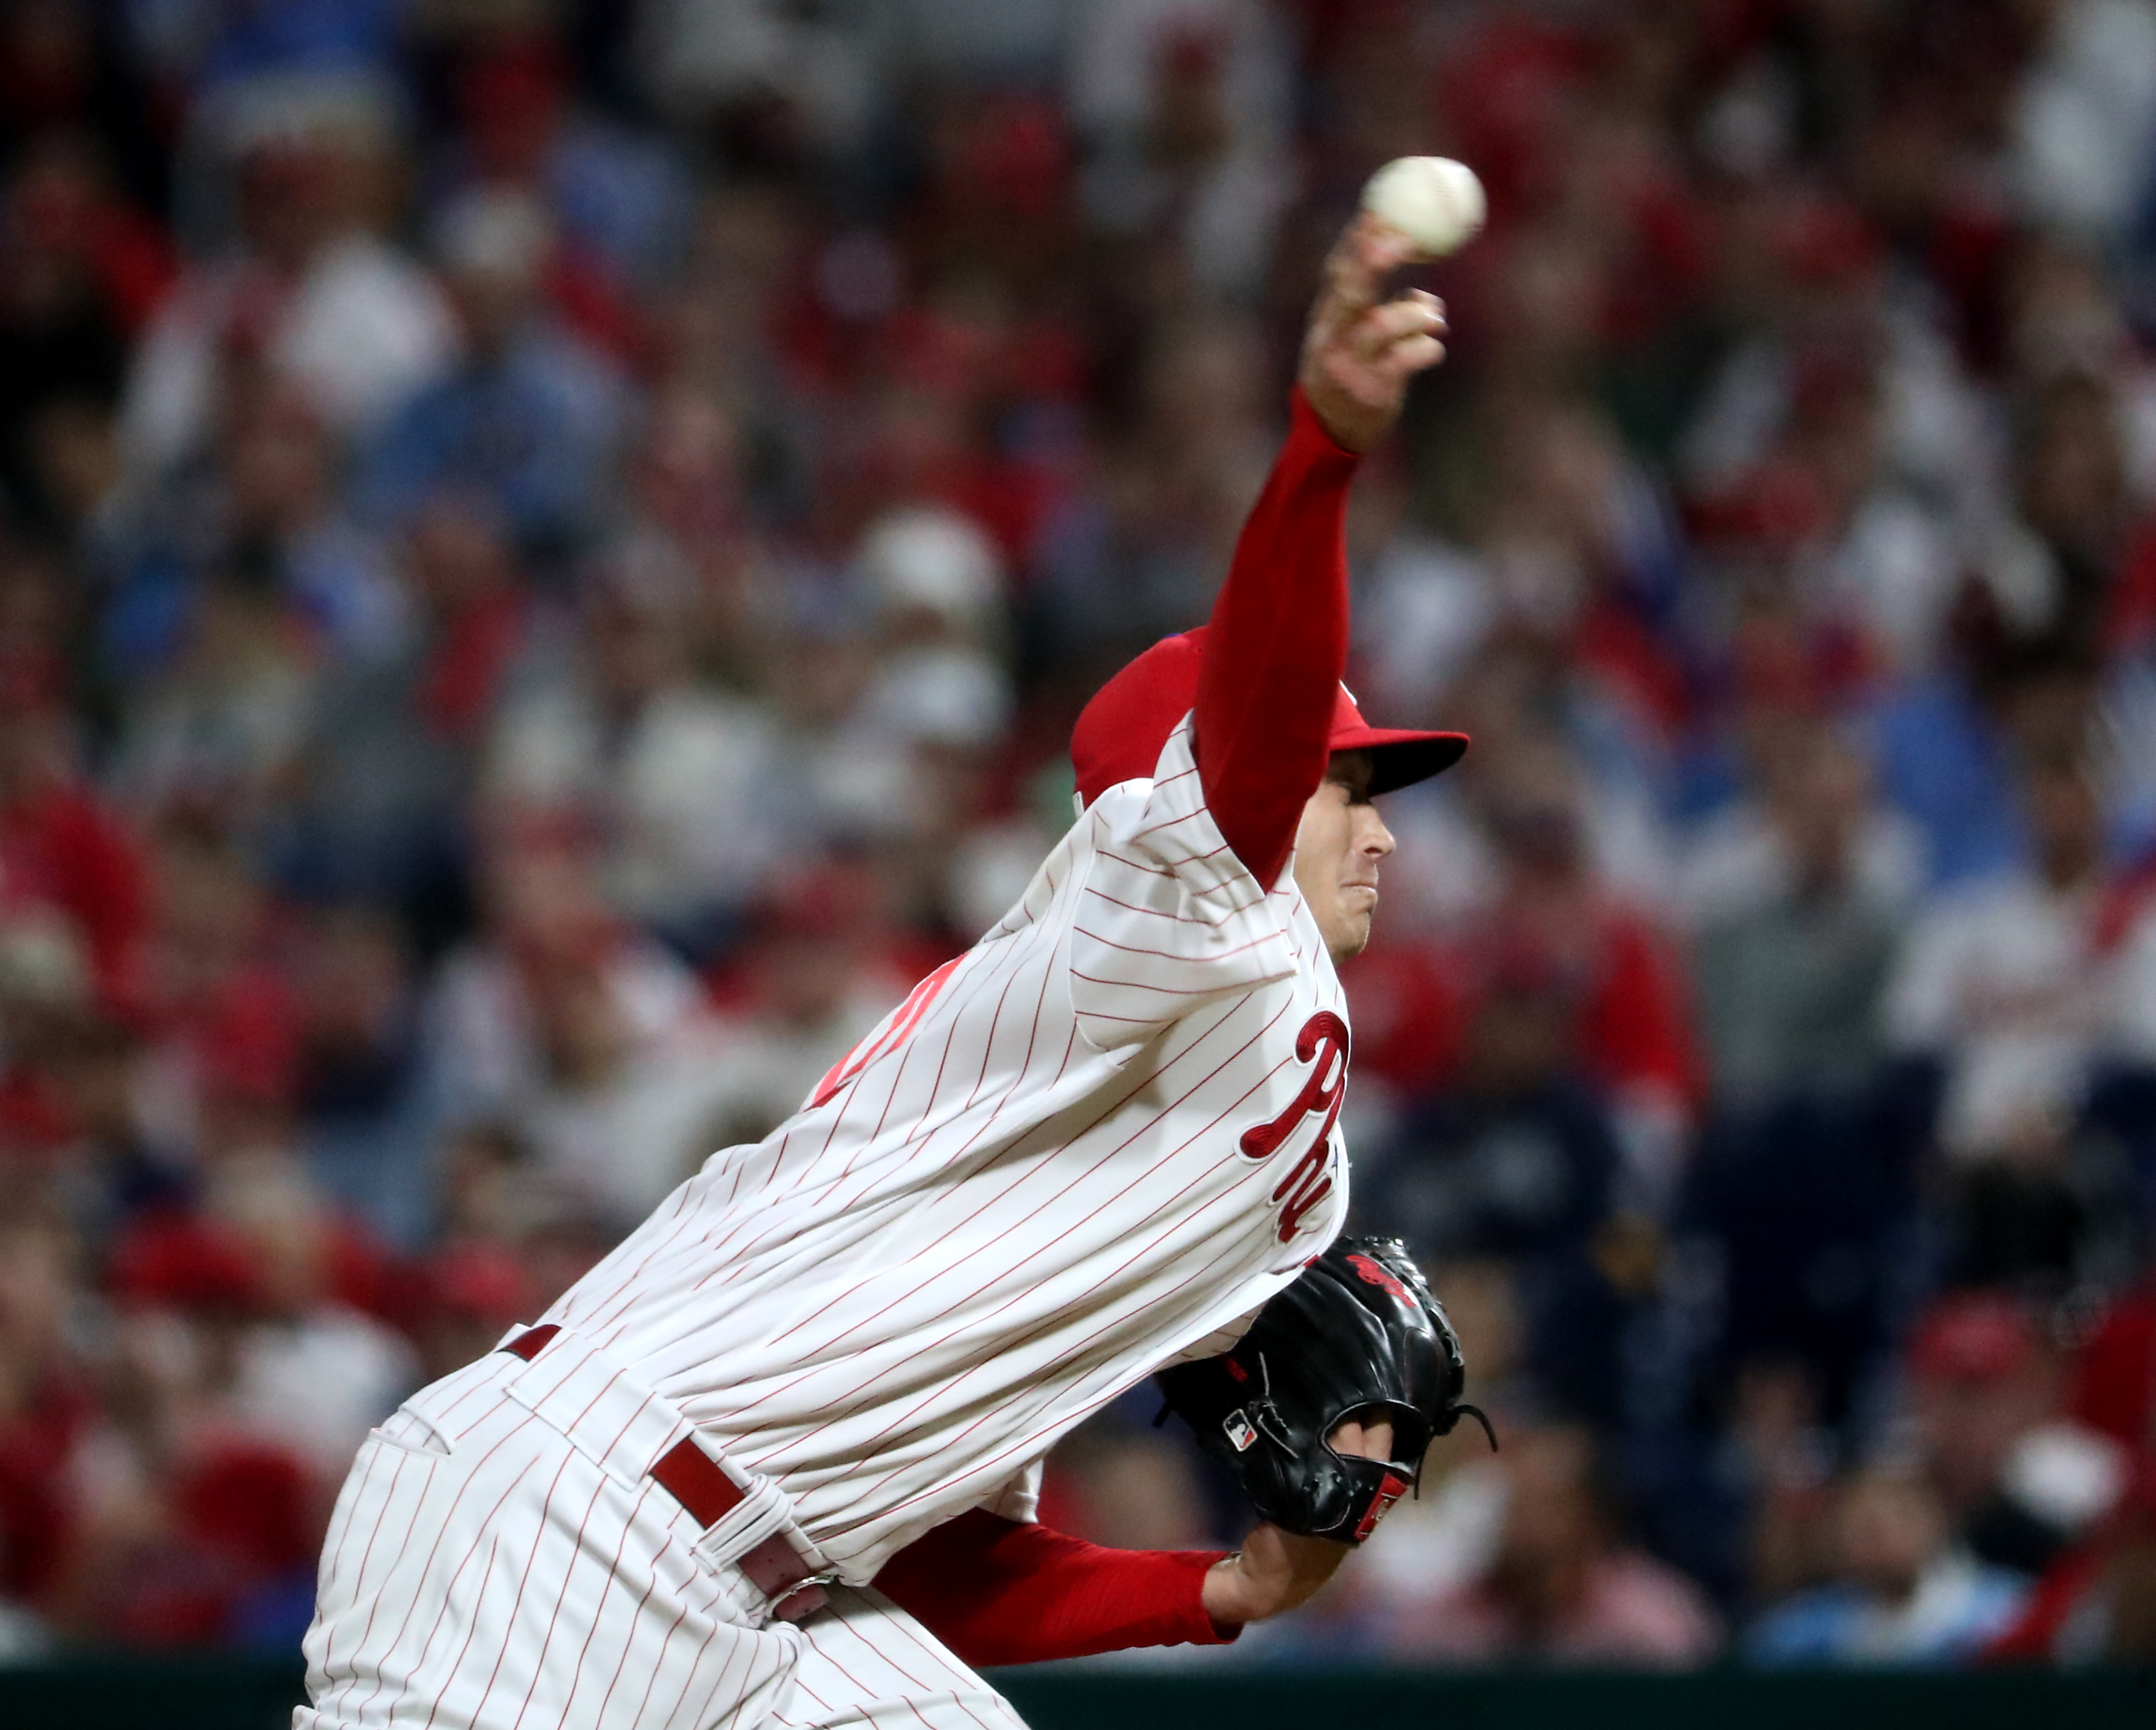 Kyle Gibson (44) of the Philadelphia Phillies delivers the pitch in the seventh inning during World Series Game 3 against the Houston Astros at Citizens Bank Park, Tuesday, Nov. 1, 2022.